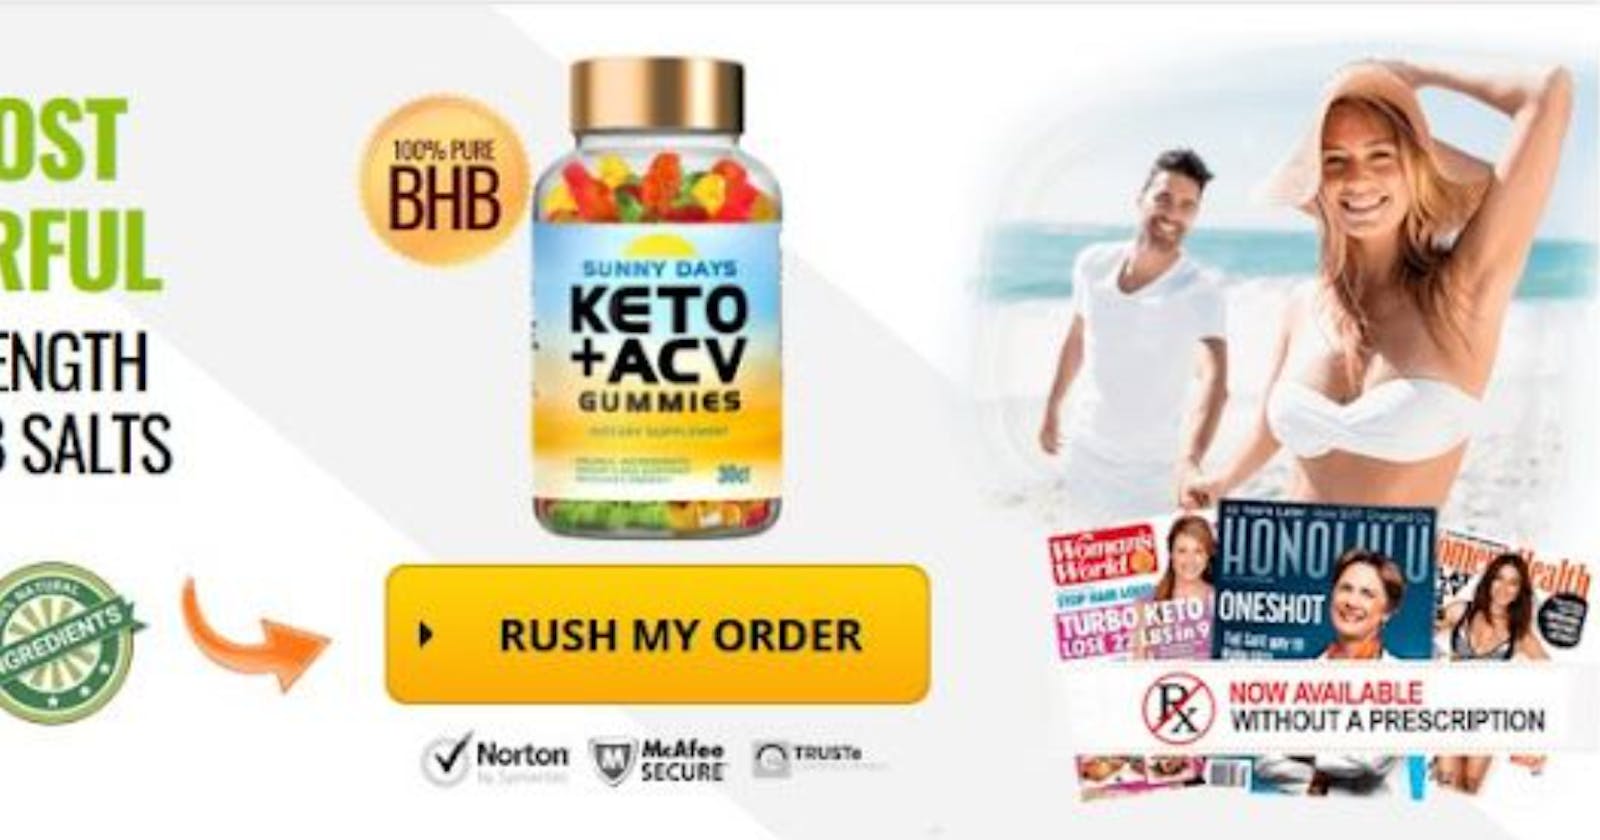 Sunny Days Keto ACV Gummies South Africa Reviews – Sunny Days For Good Weight Loss Probiotic Supplement?